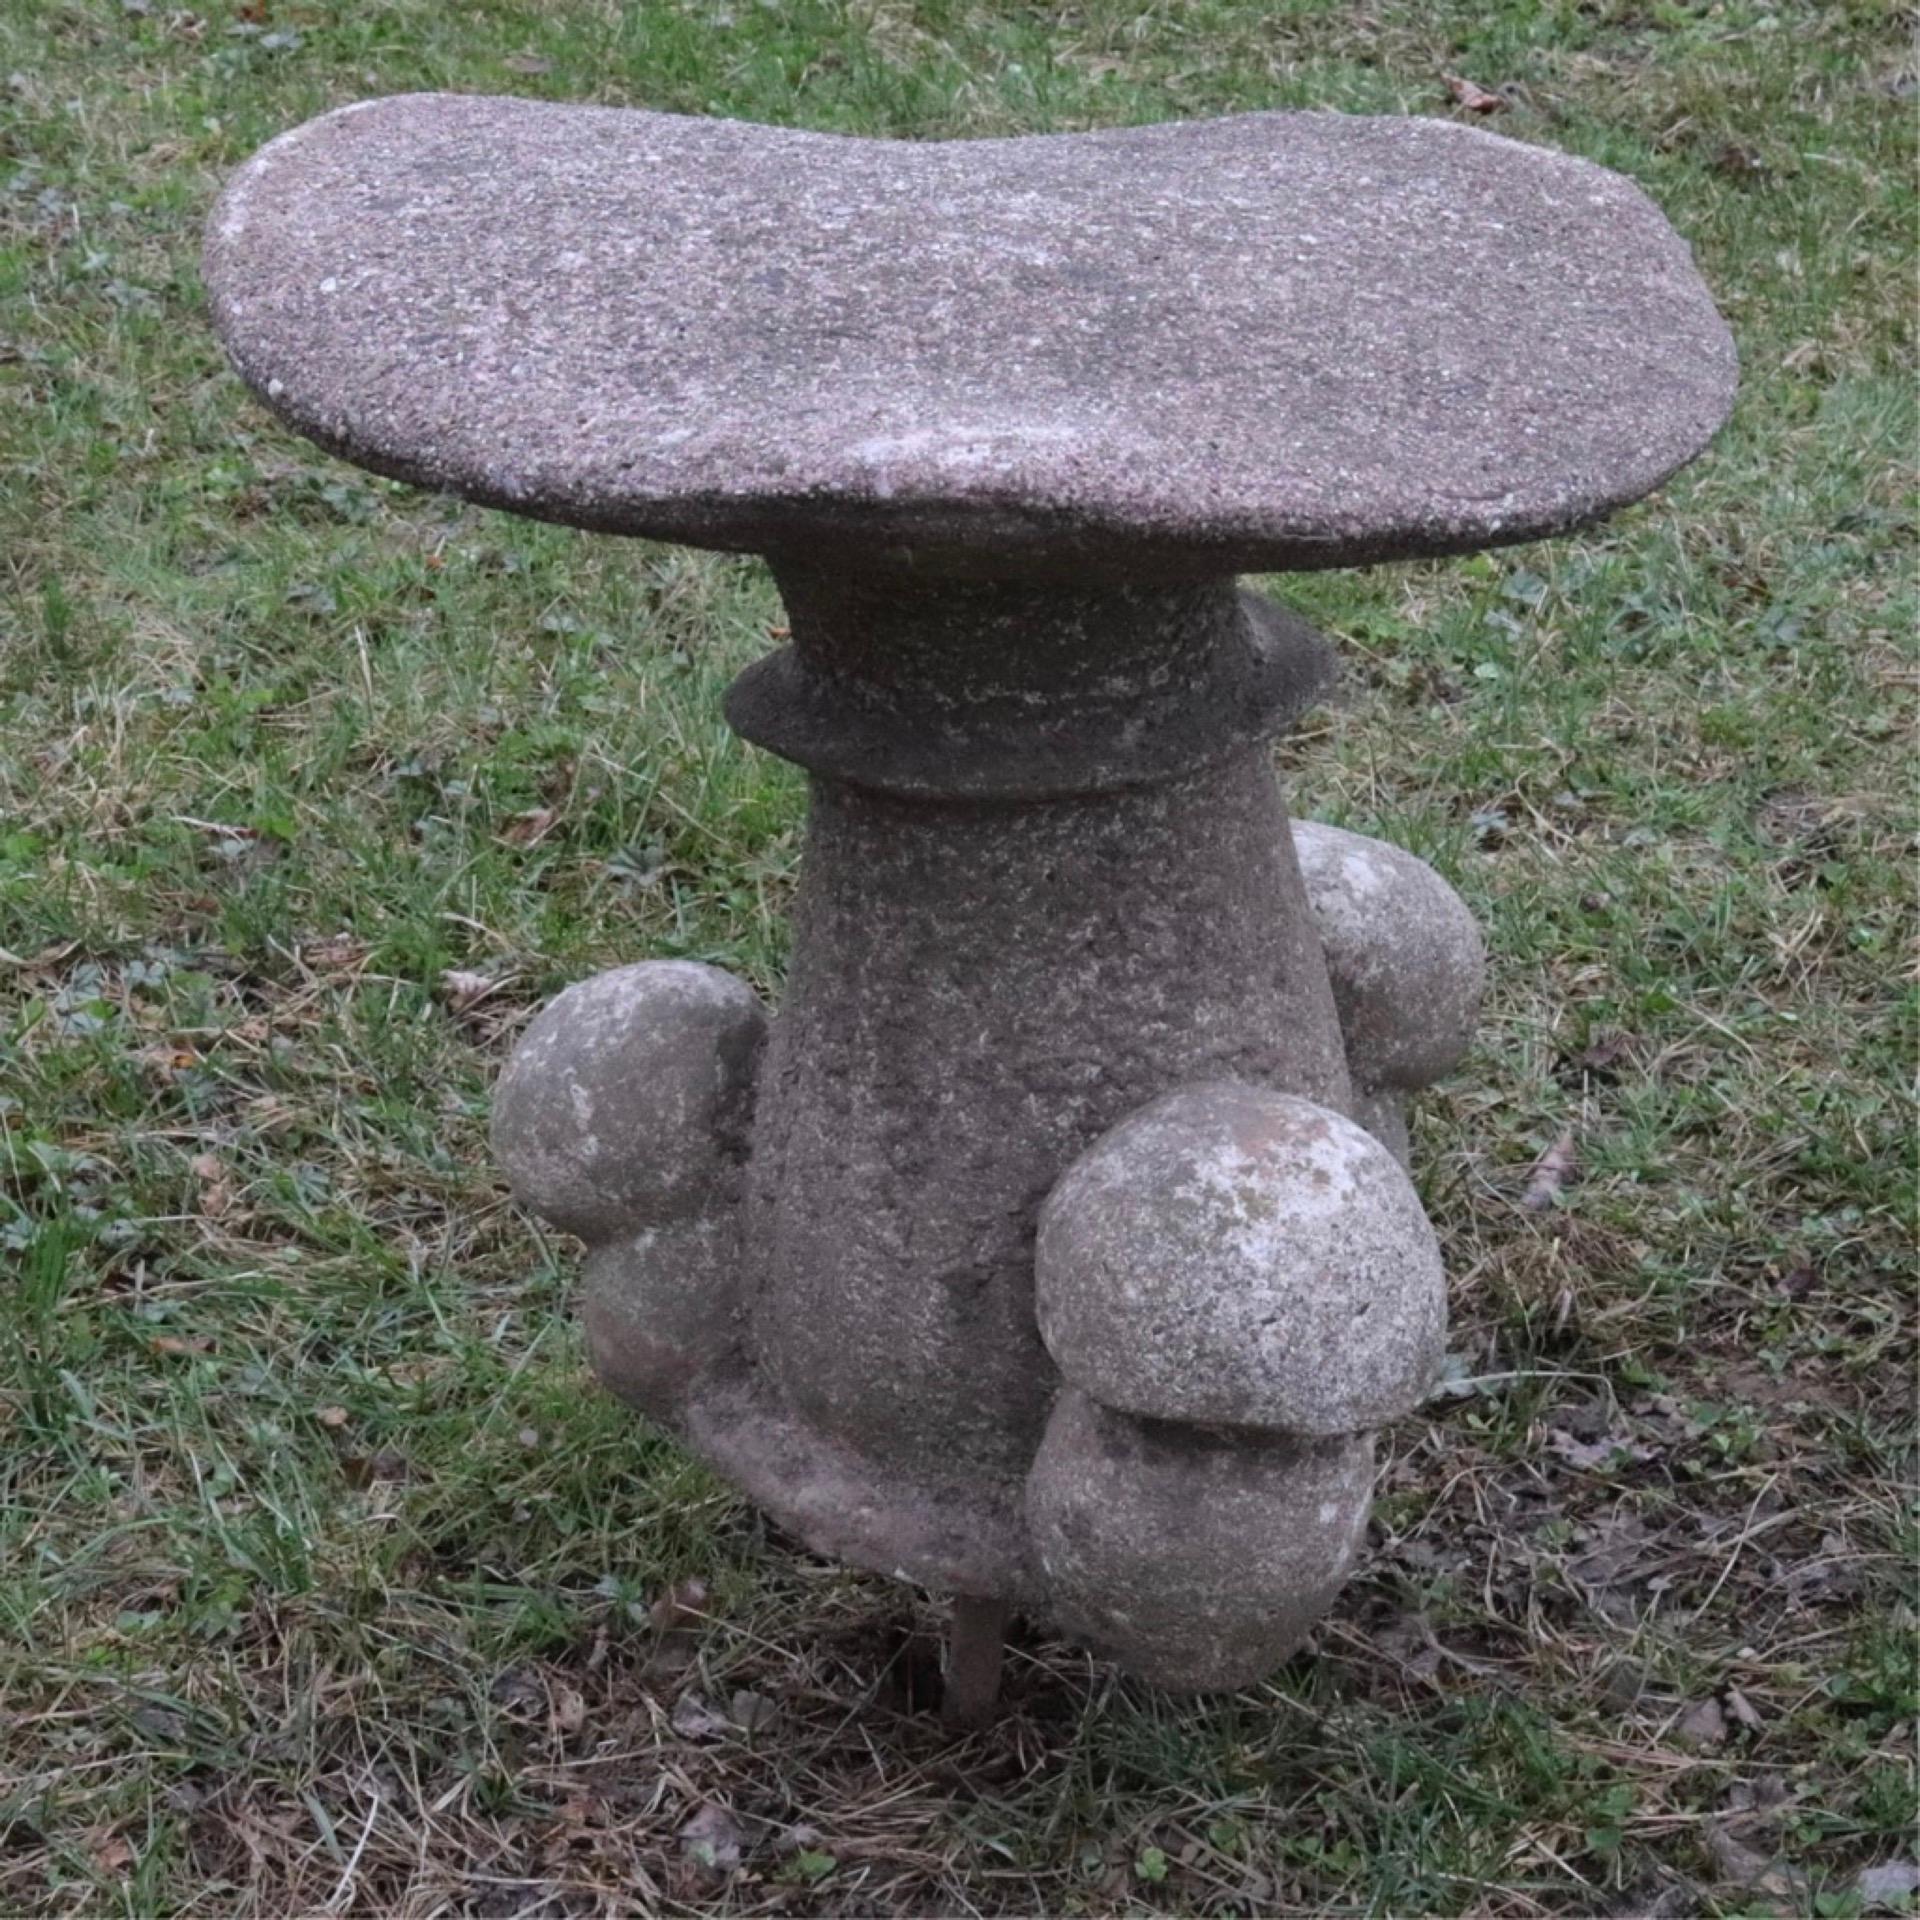 The pair of wonderfully charming cast cement toad stools make a welcome addition to any garden. These large hand cast stone mushrooms have a naturalistic patina,-- great garden ornament, sculptures or statues.
 